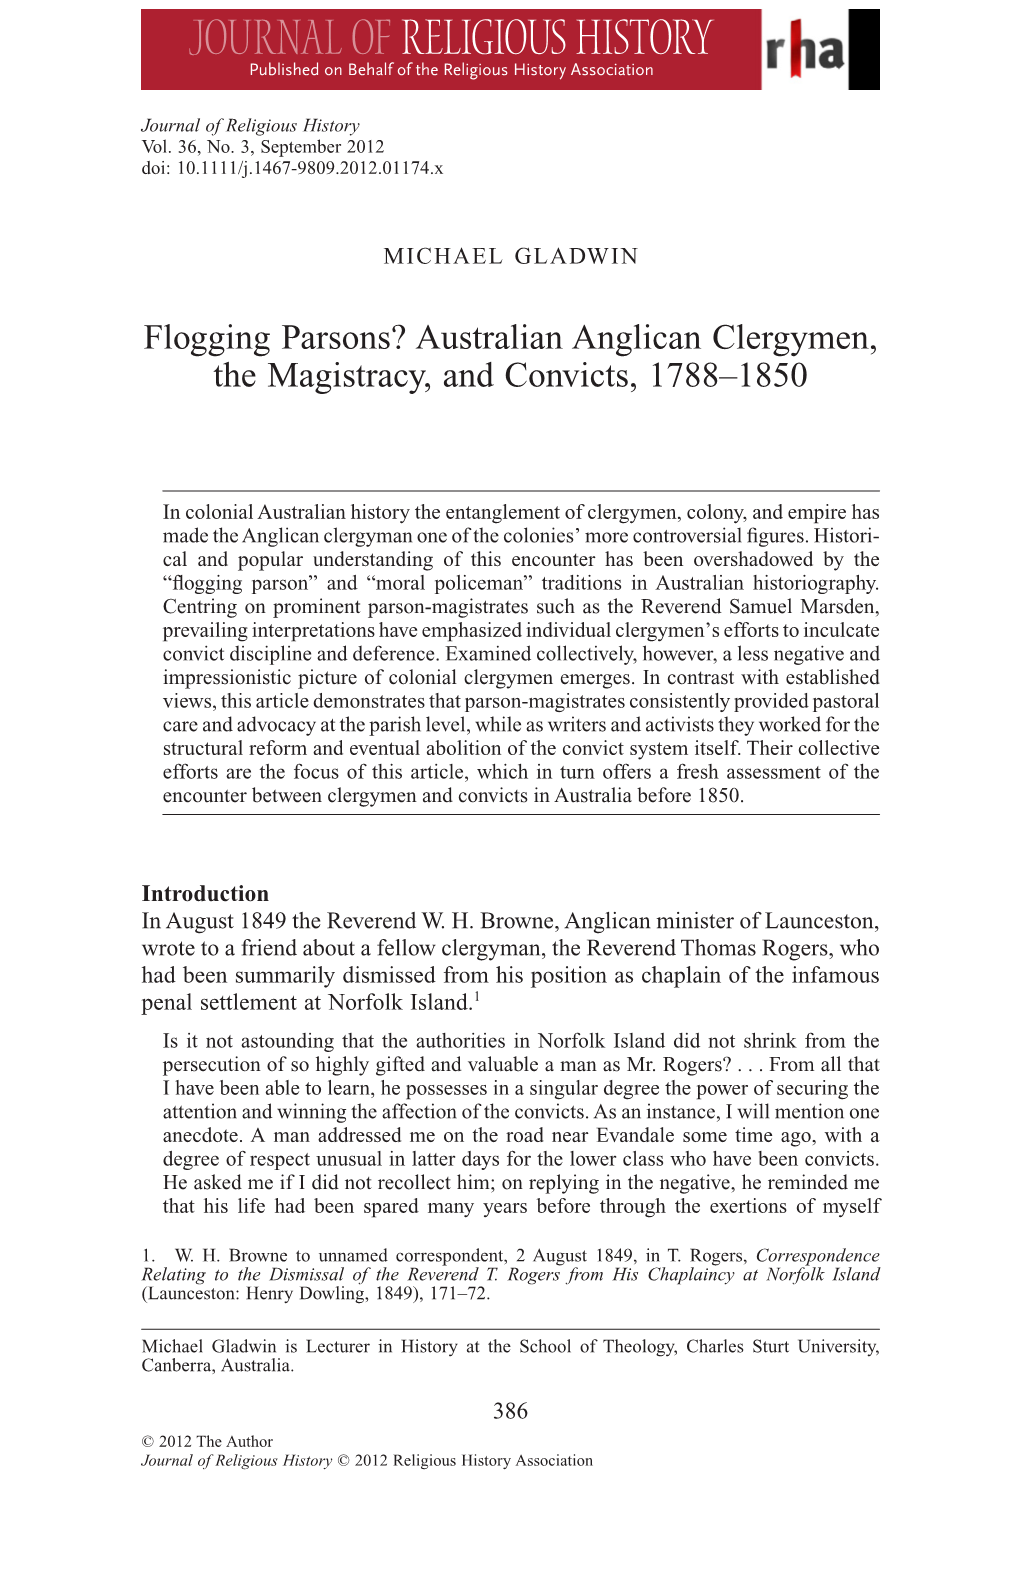 Australian Anglican Clergymen, the Magistracy, and Convicts, 17881850